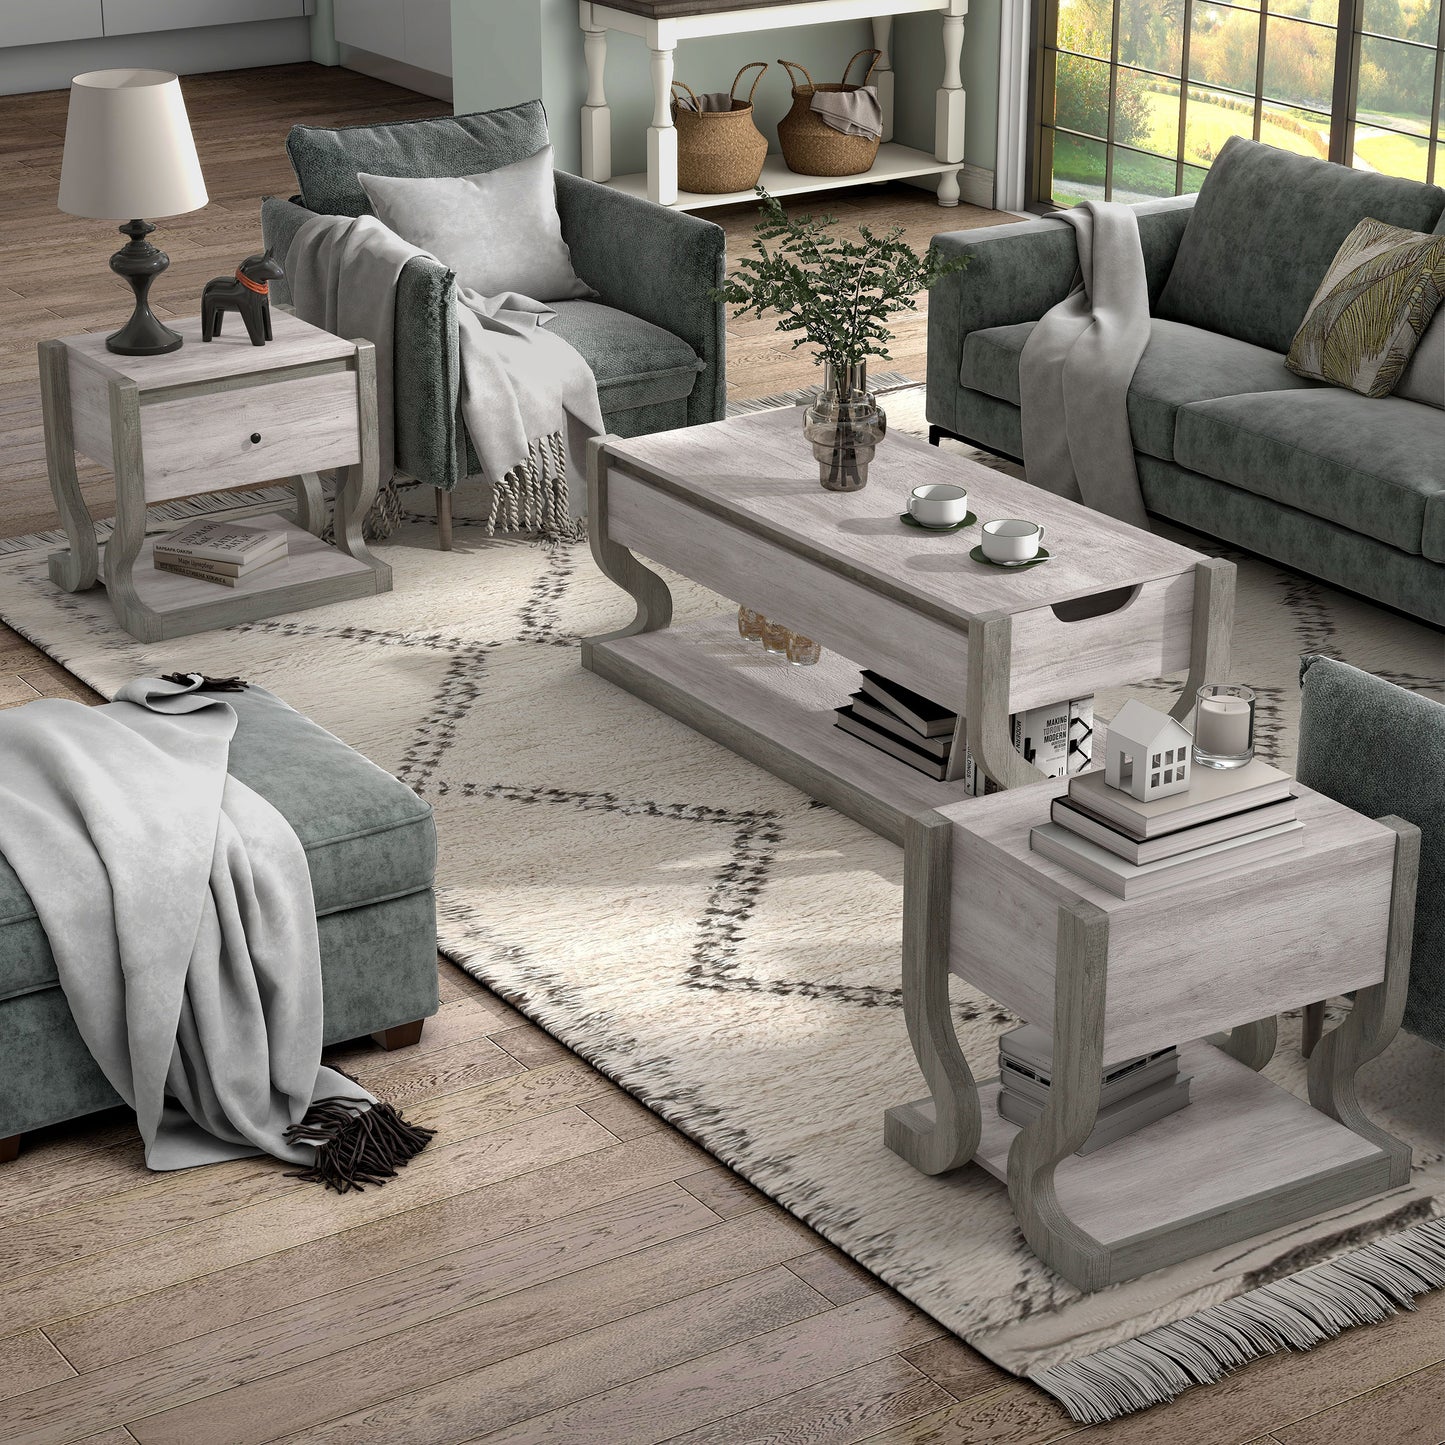 Left angled transitional three-piece coastal white coffee table set with storage in a living room with accessories